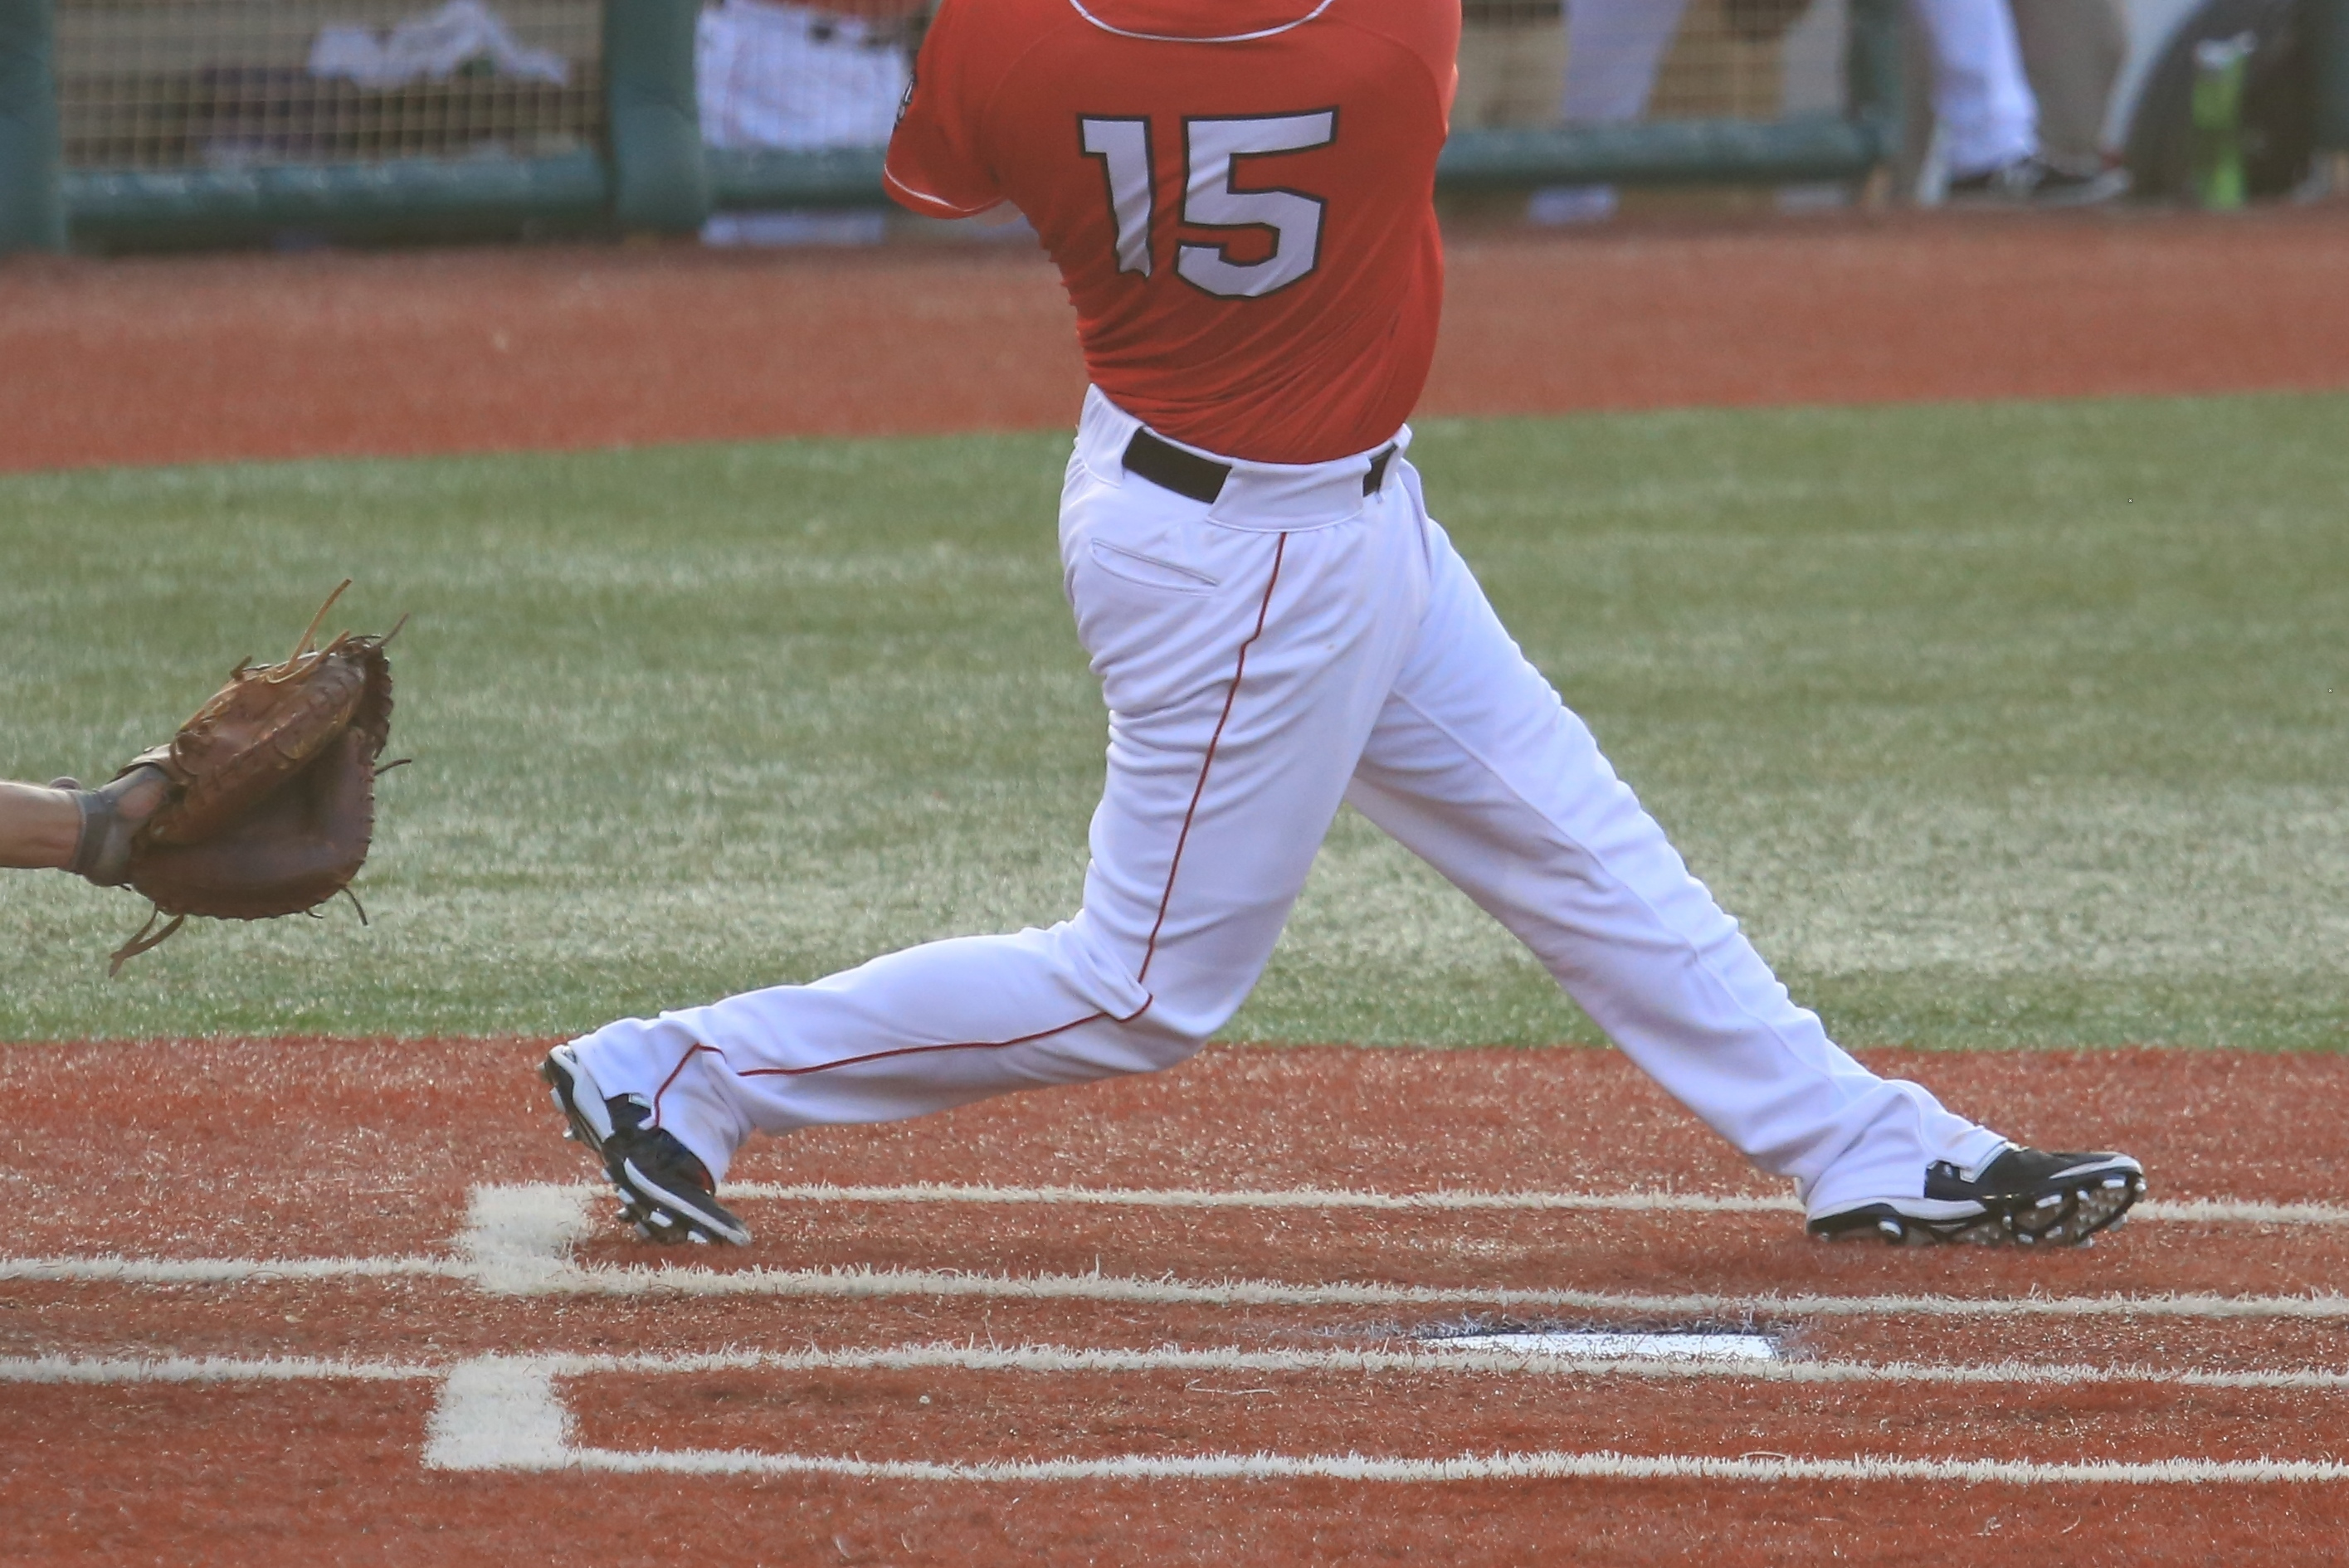 A baseball player is playing on the field